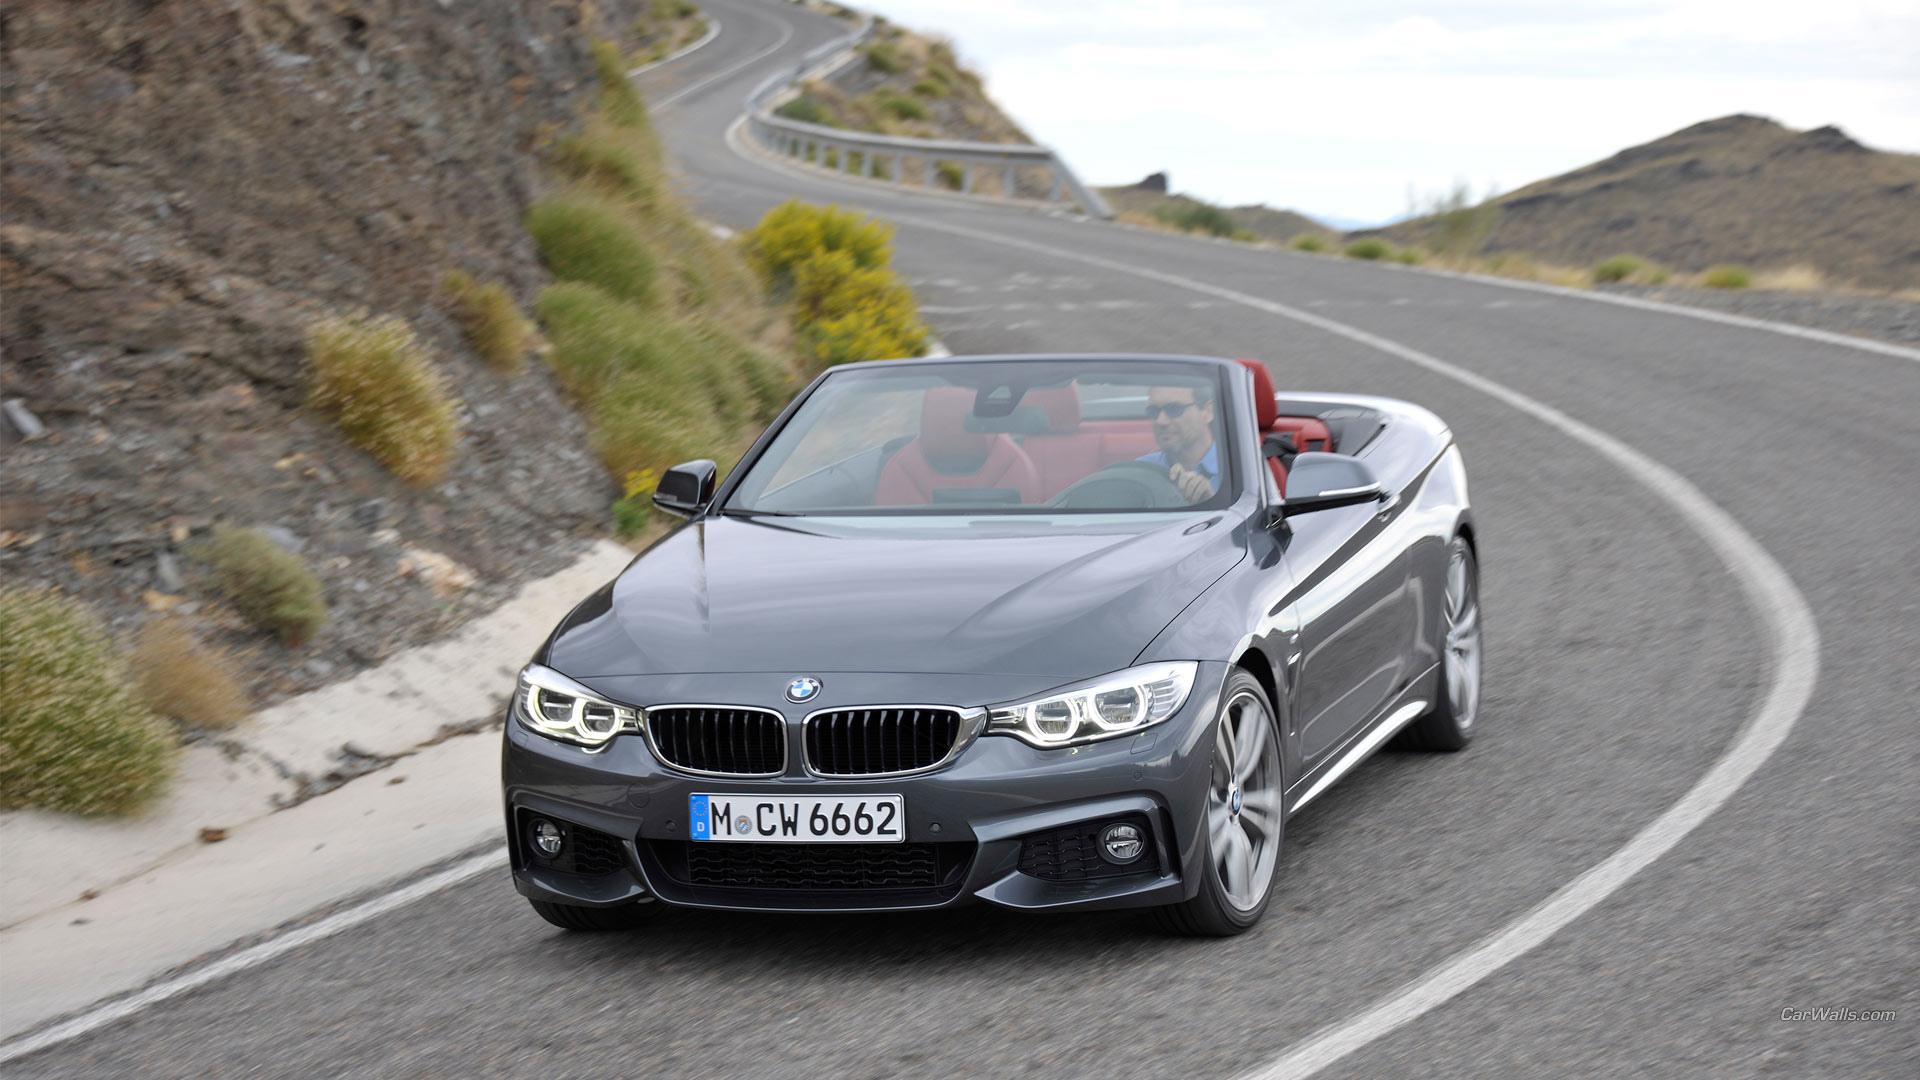 2014 BMW 4-Series Convertible wallpapers HD quality